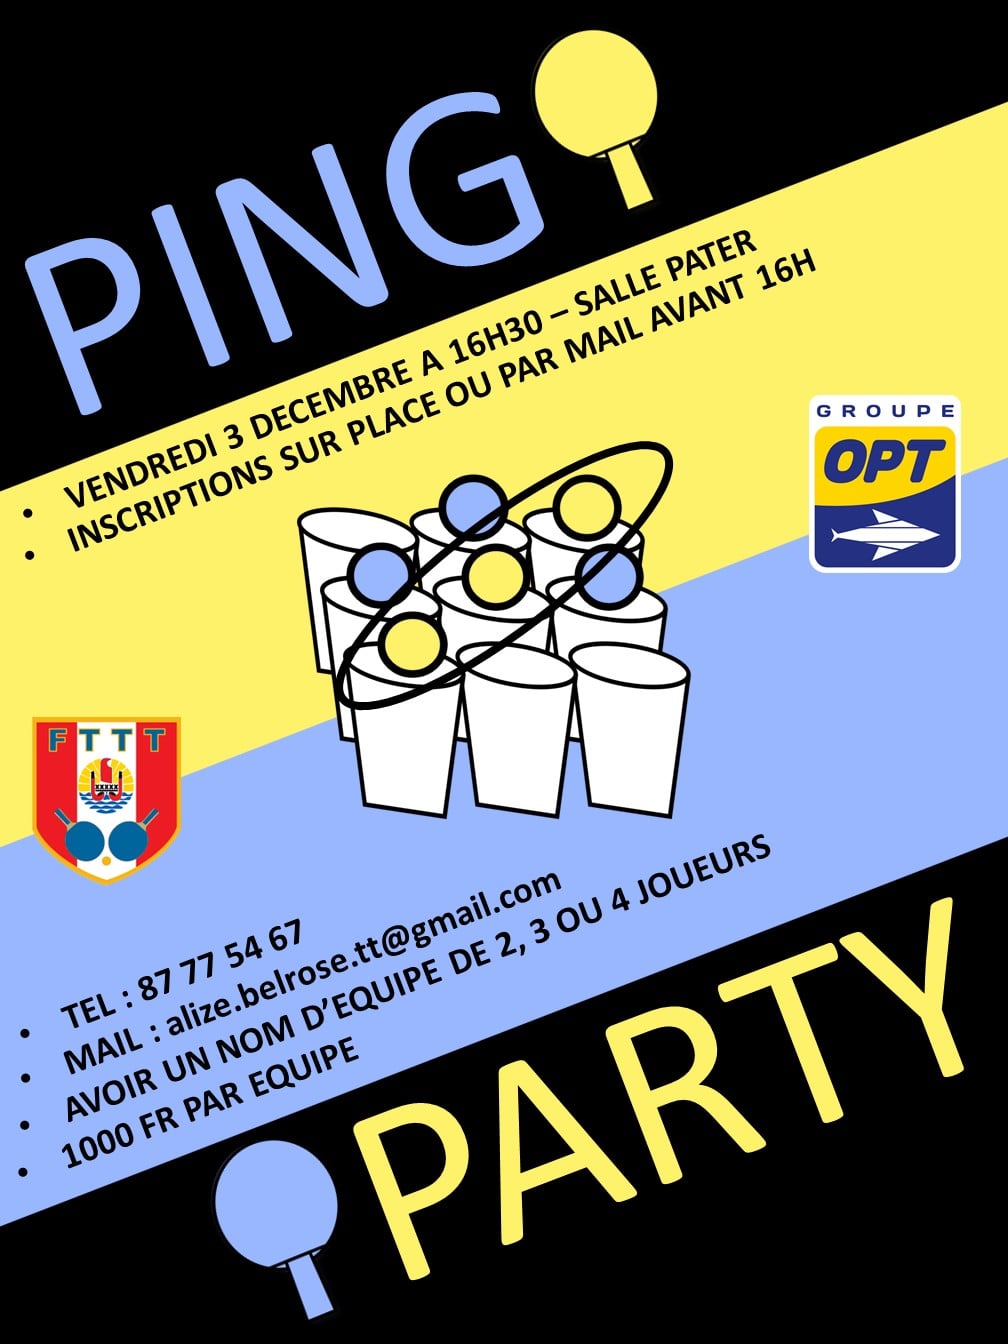 PING PARTY